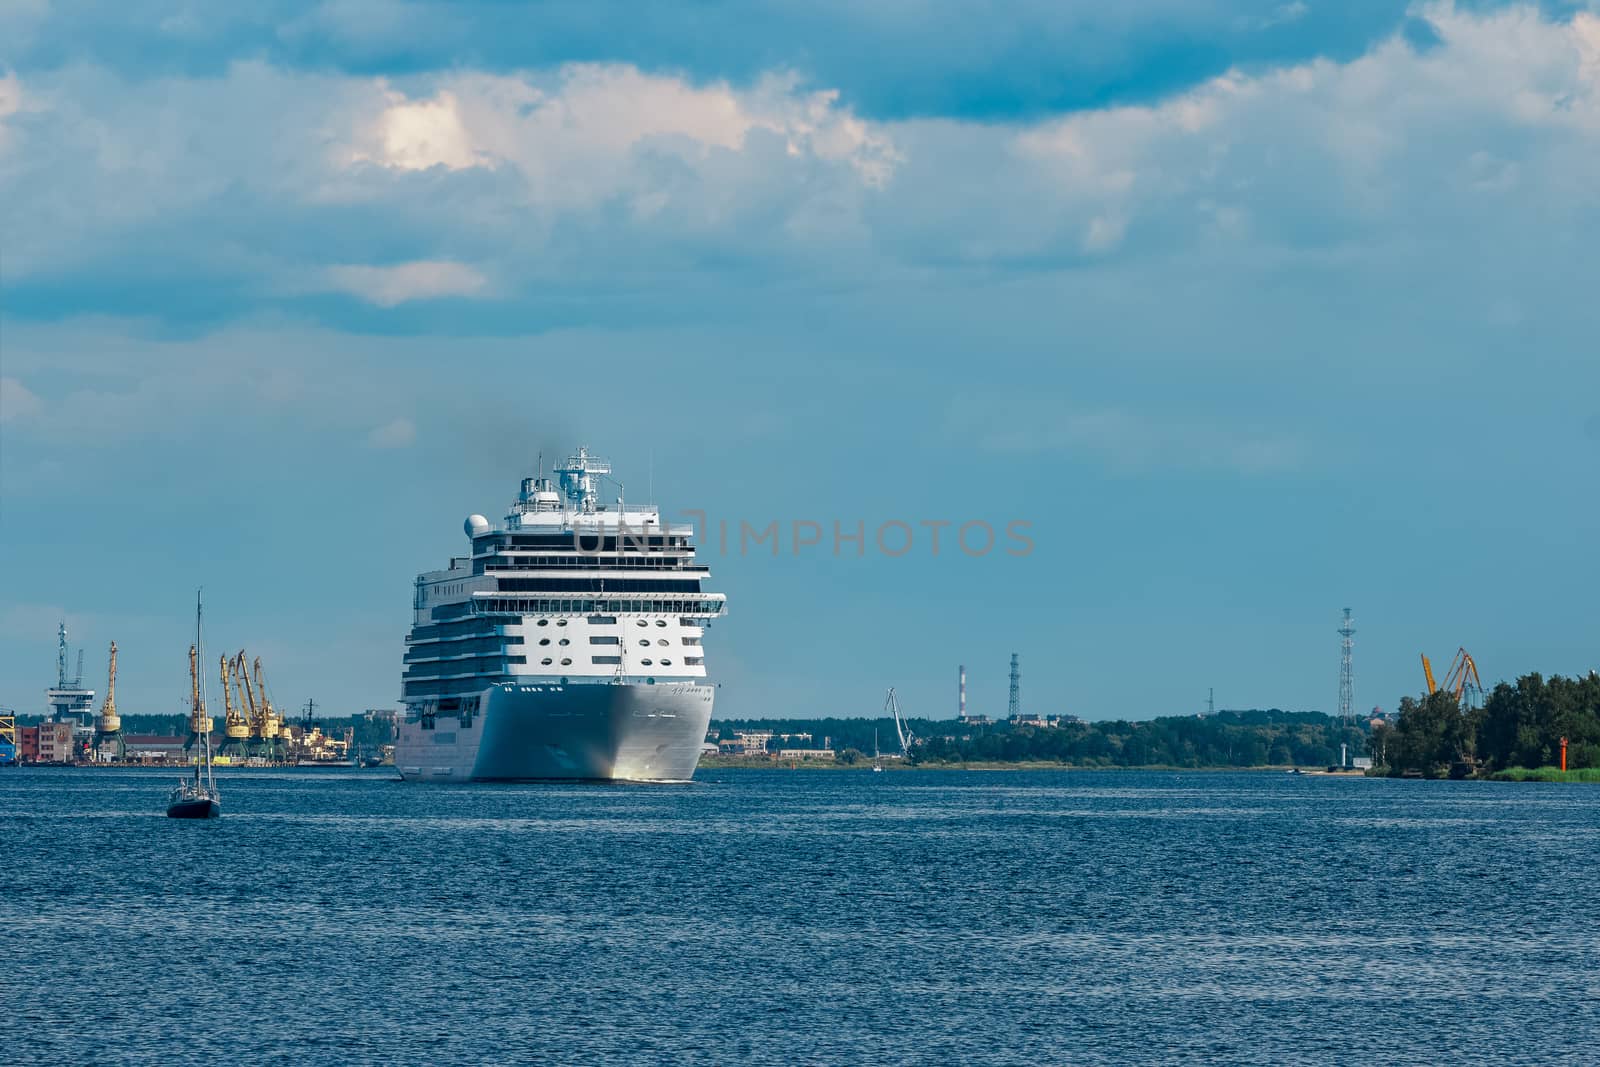 Royal cruise liner on the way by sengnsp